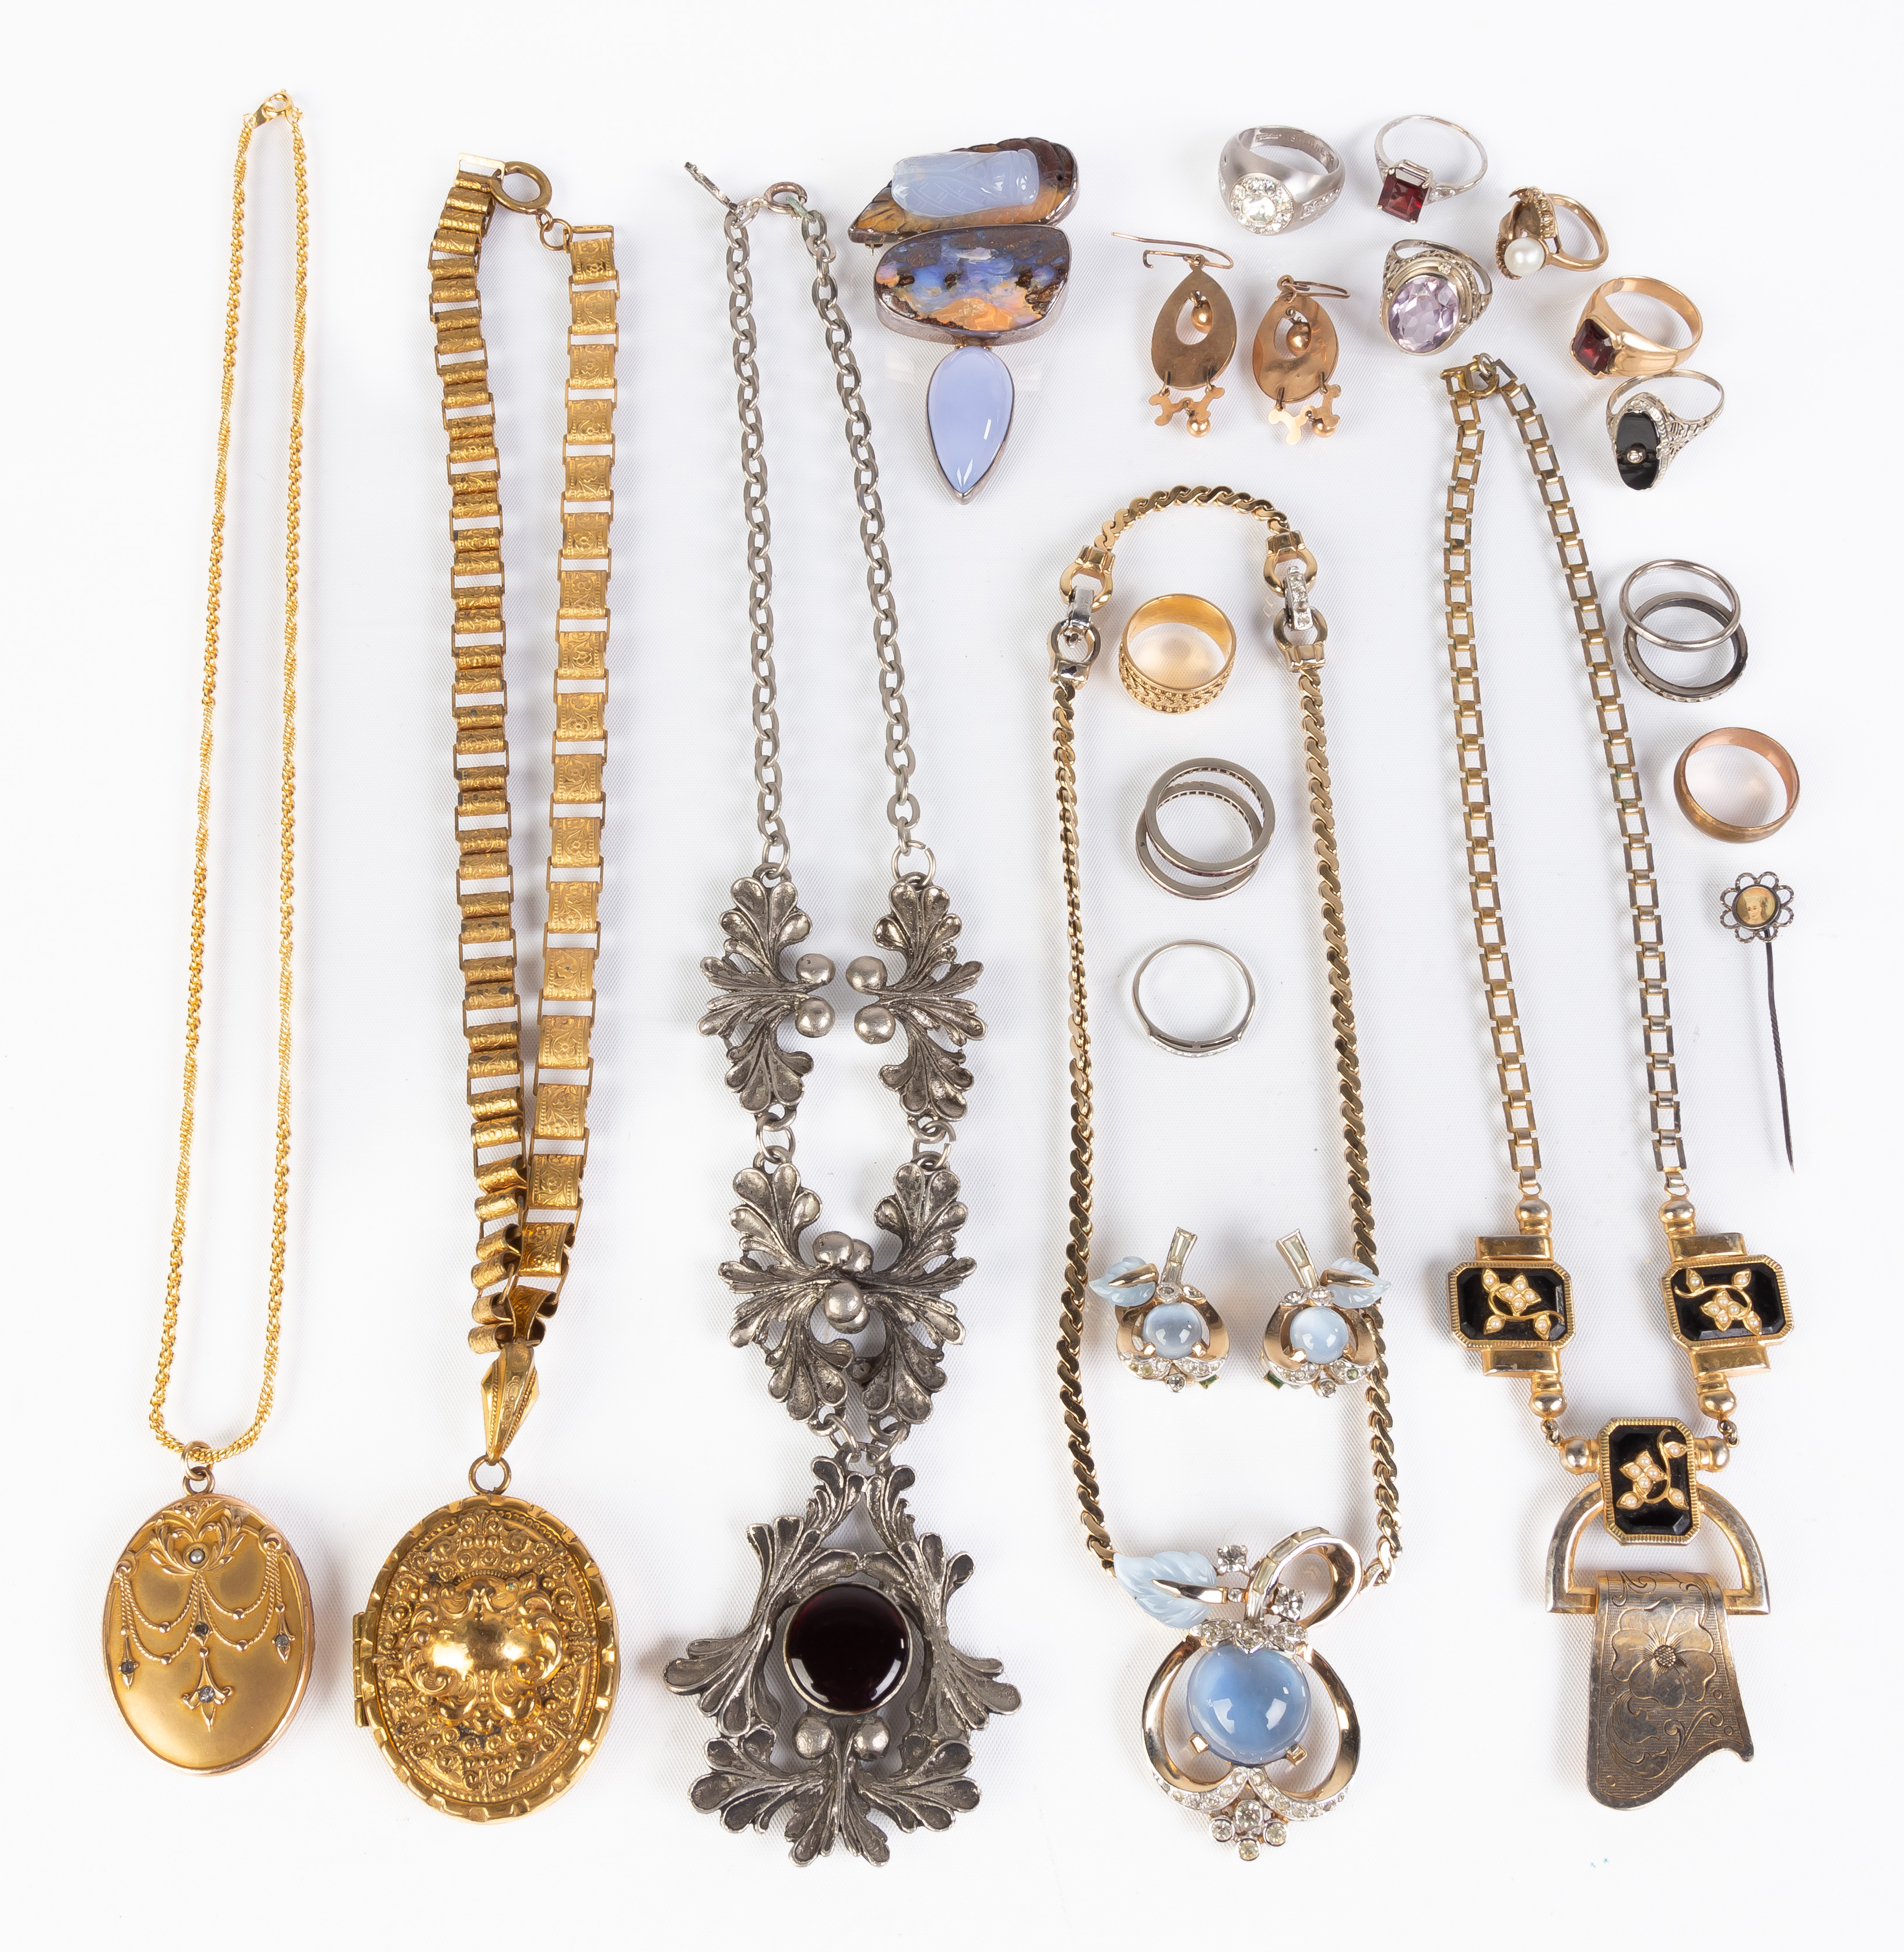 GROUP OF VINTAGE JEWELRY Group of Vintage